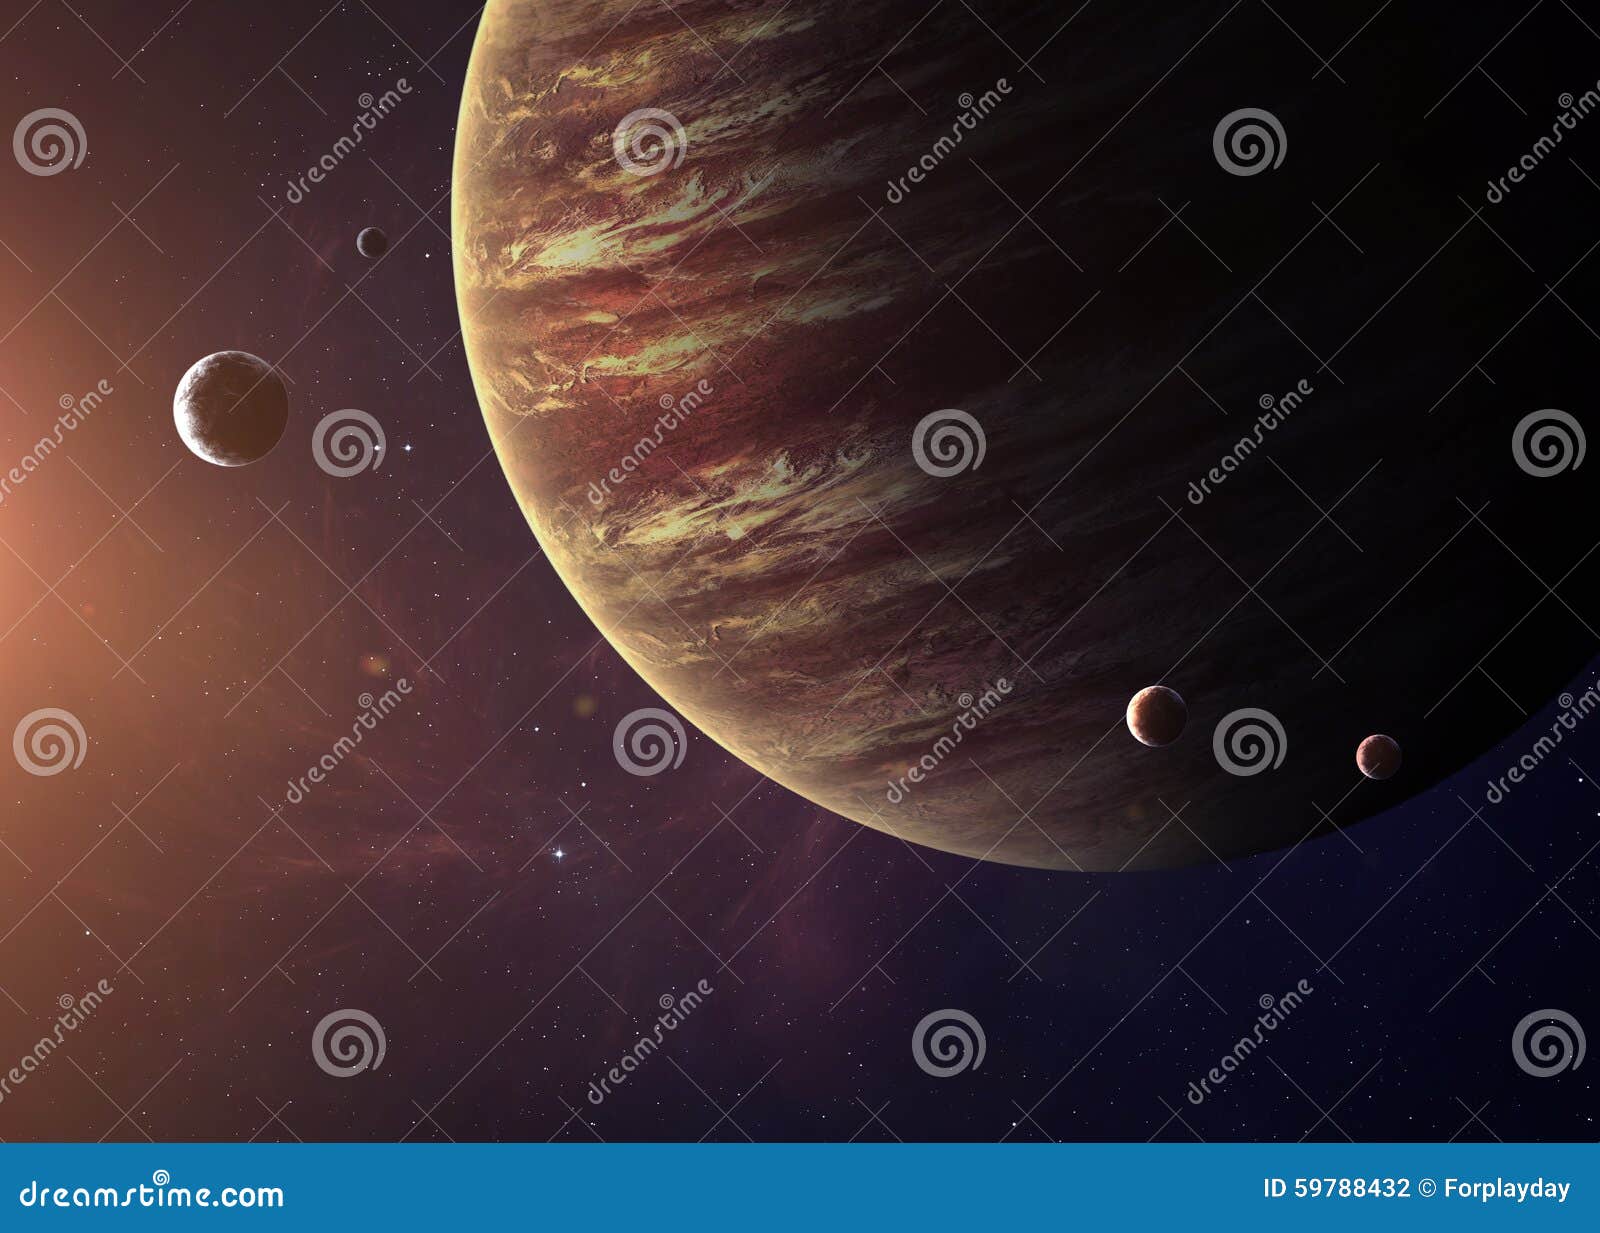 the jupiter shot from space showing all they